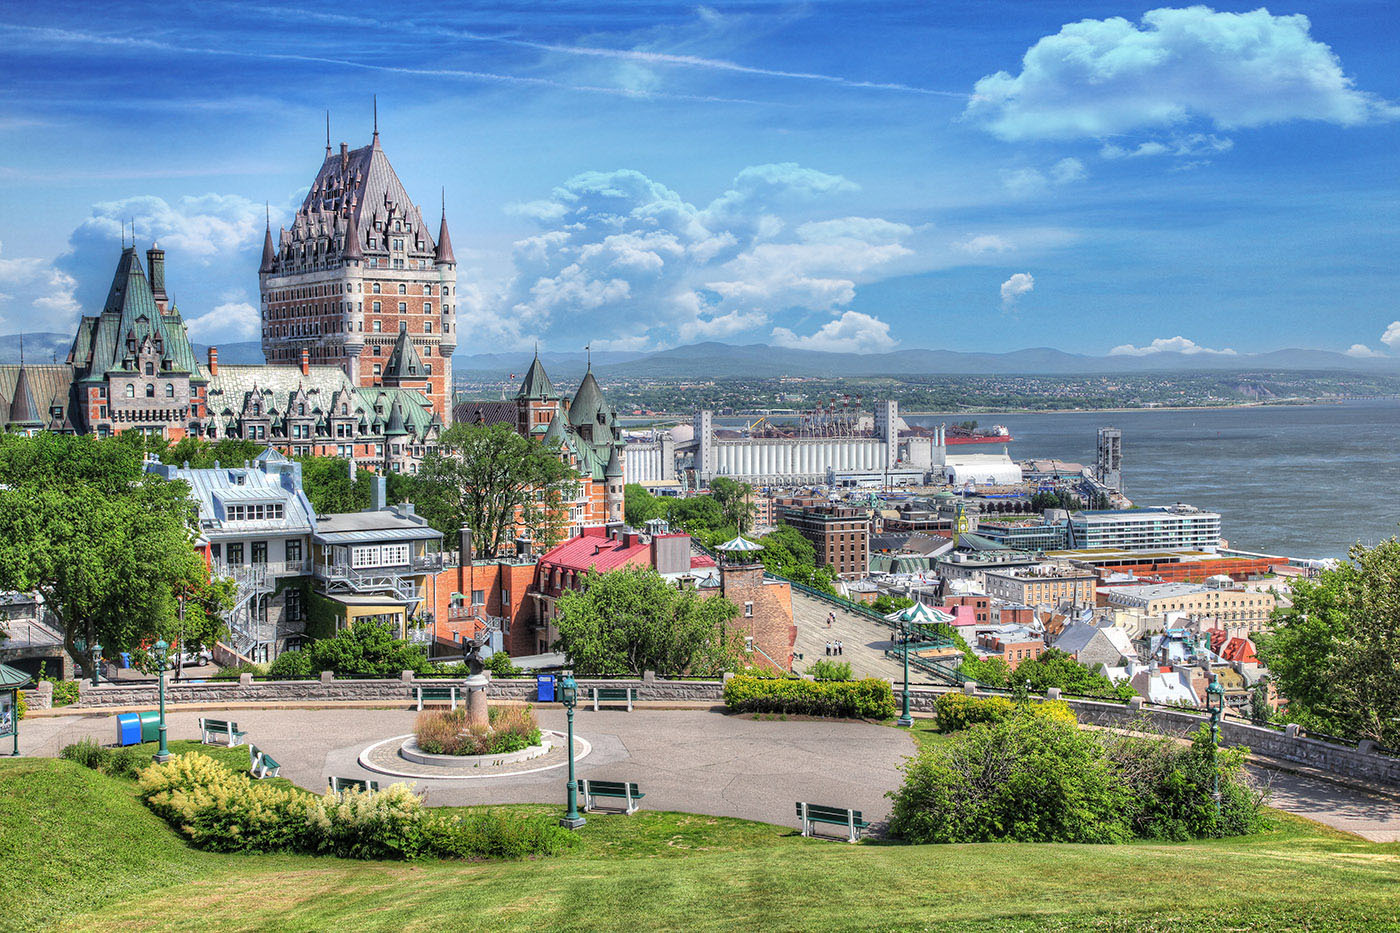 Old Quebec City District in Summer - Stock Photos, Pictures & Images